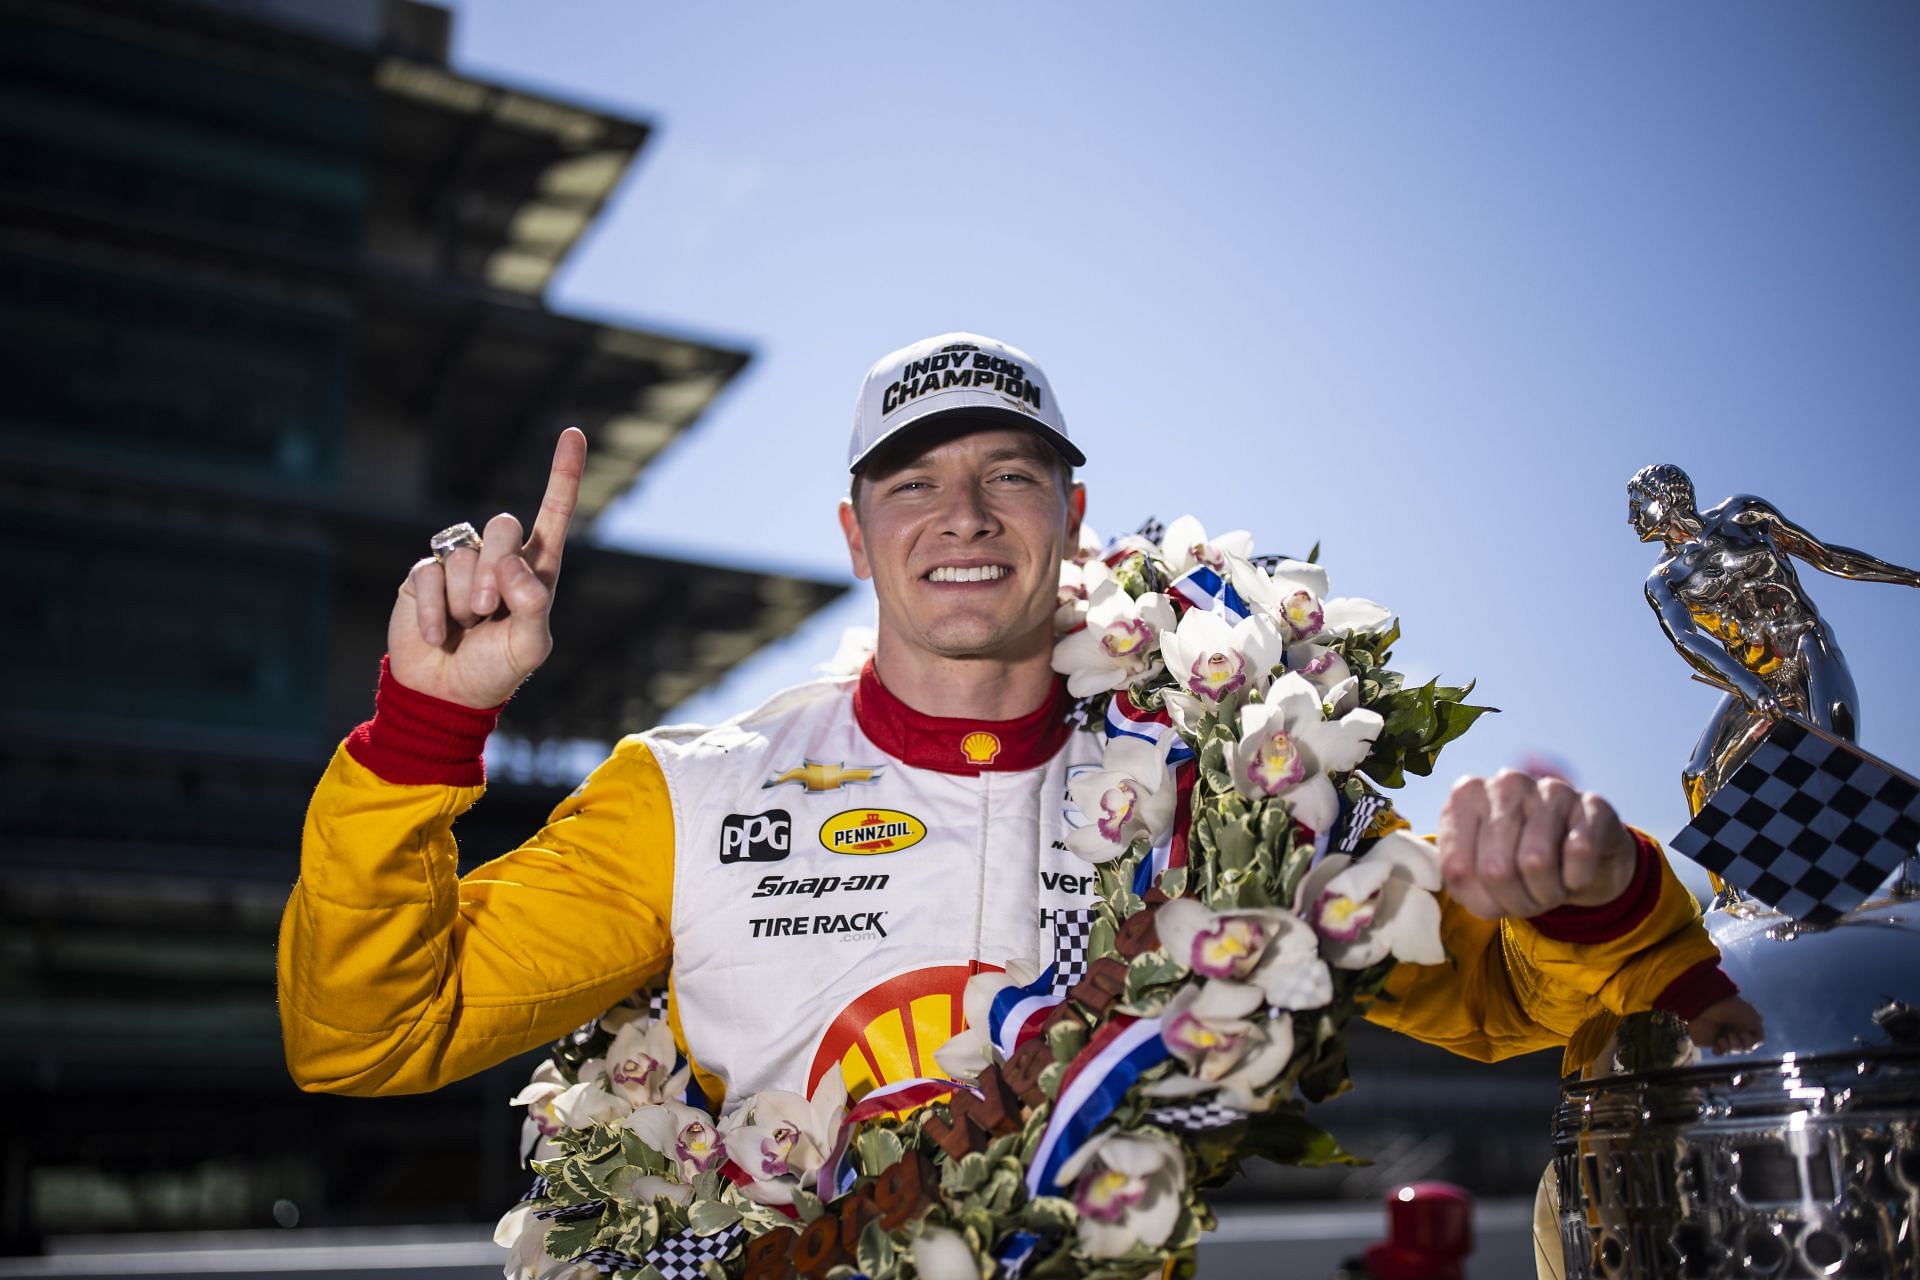 The 107th Running of Indianapolis 500 - Winner